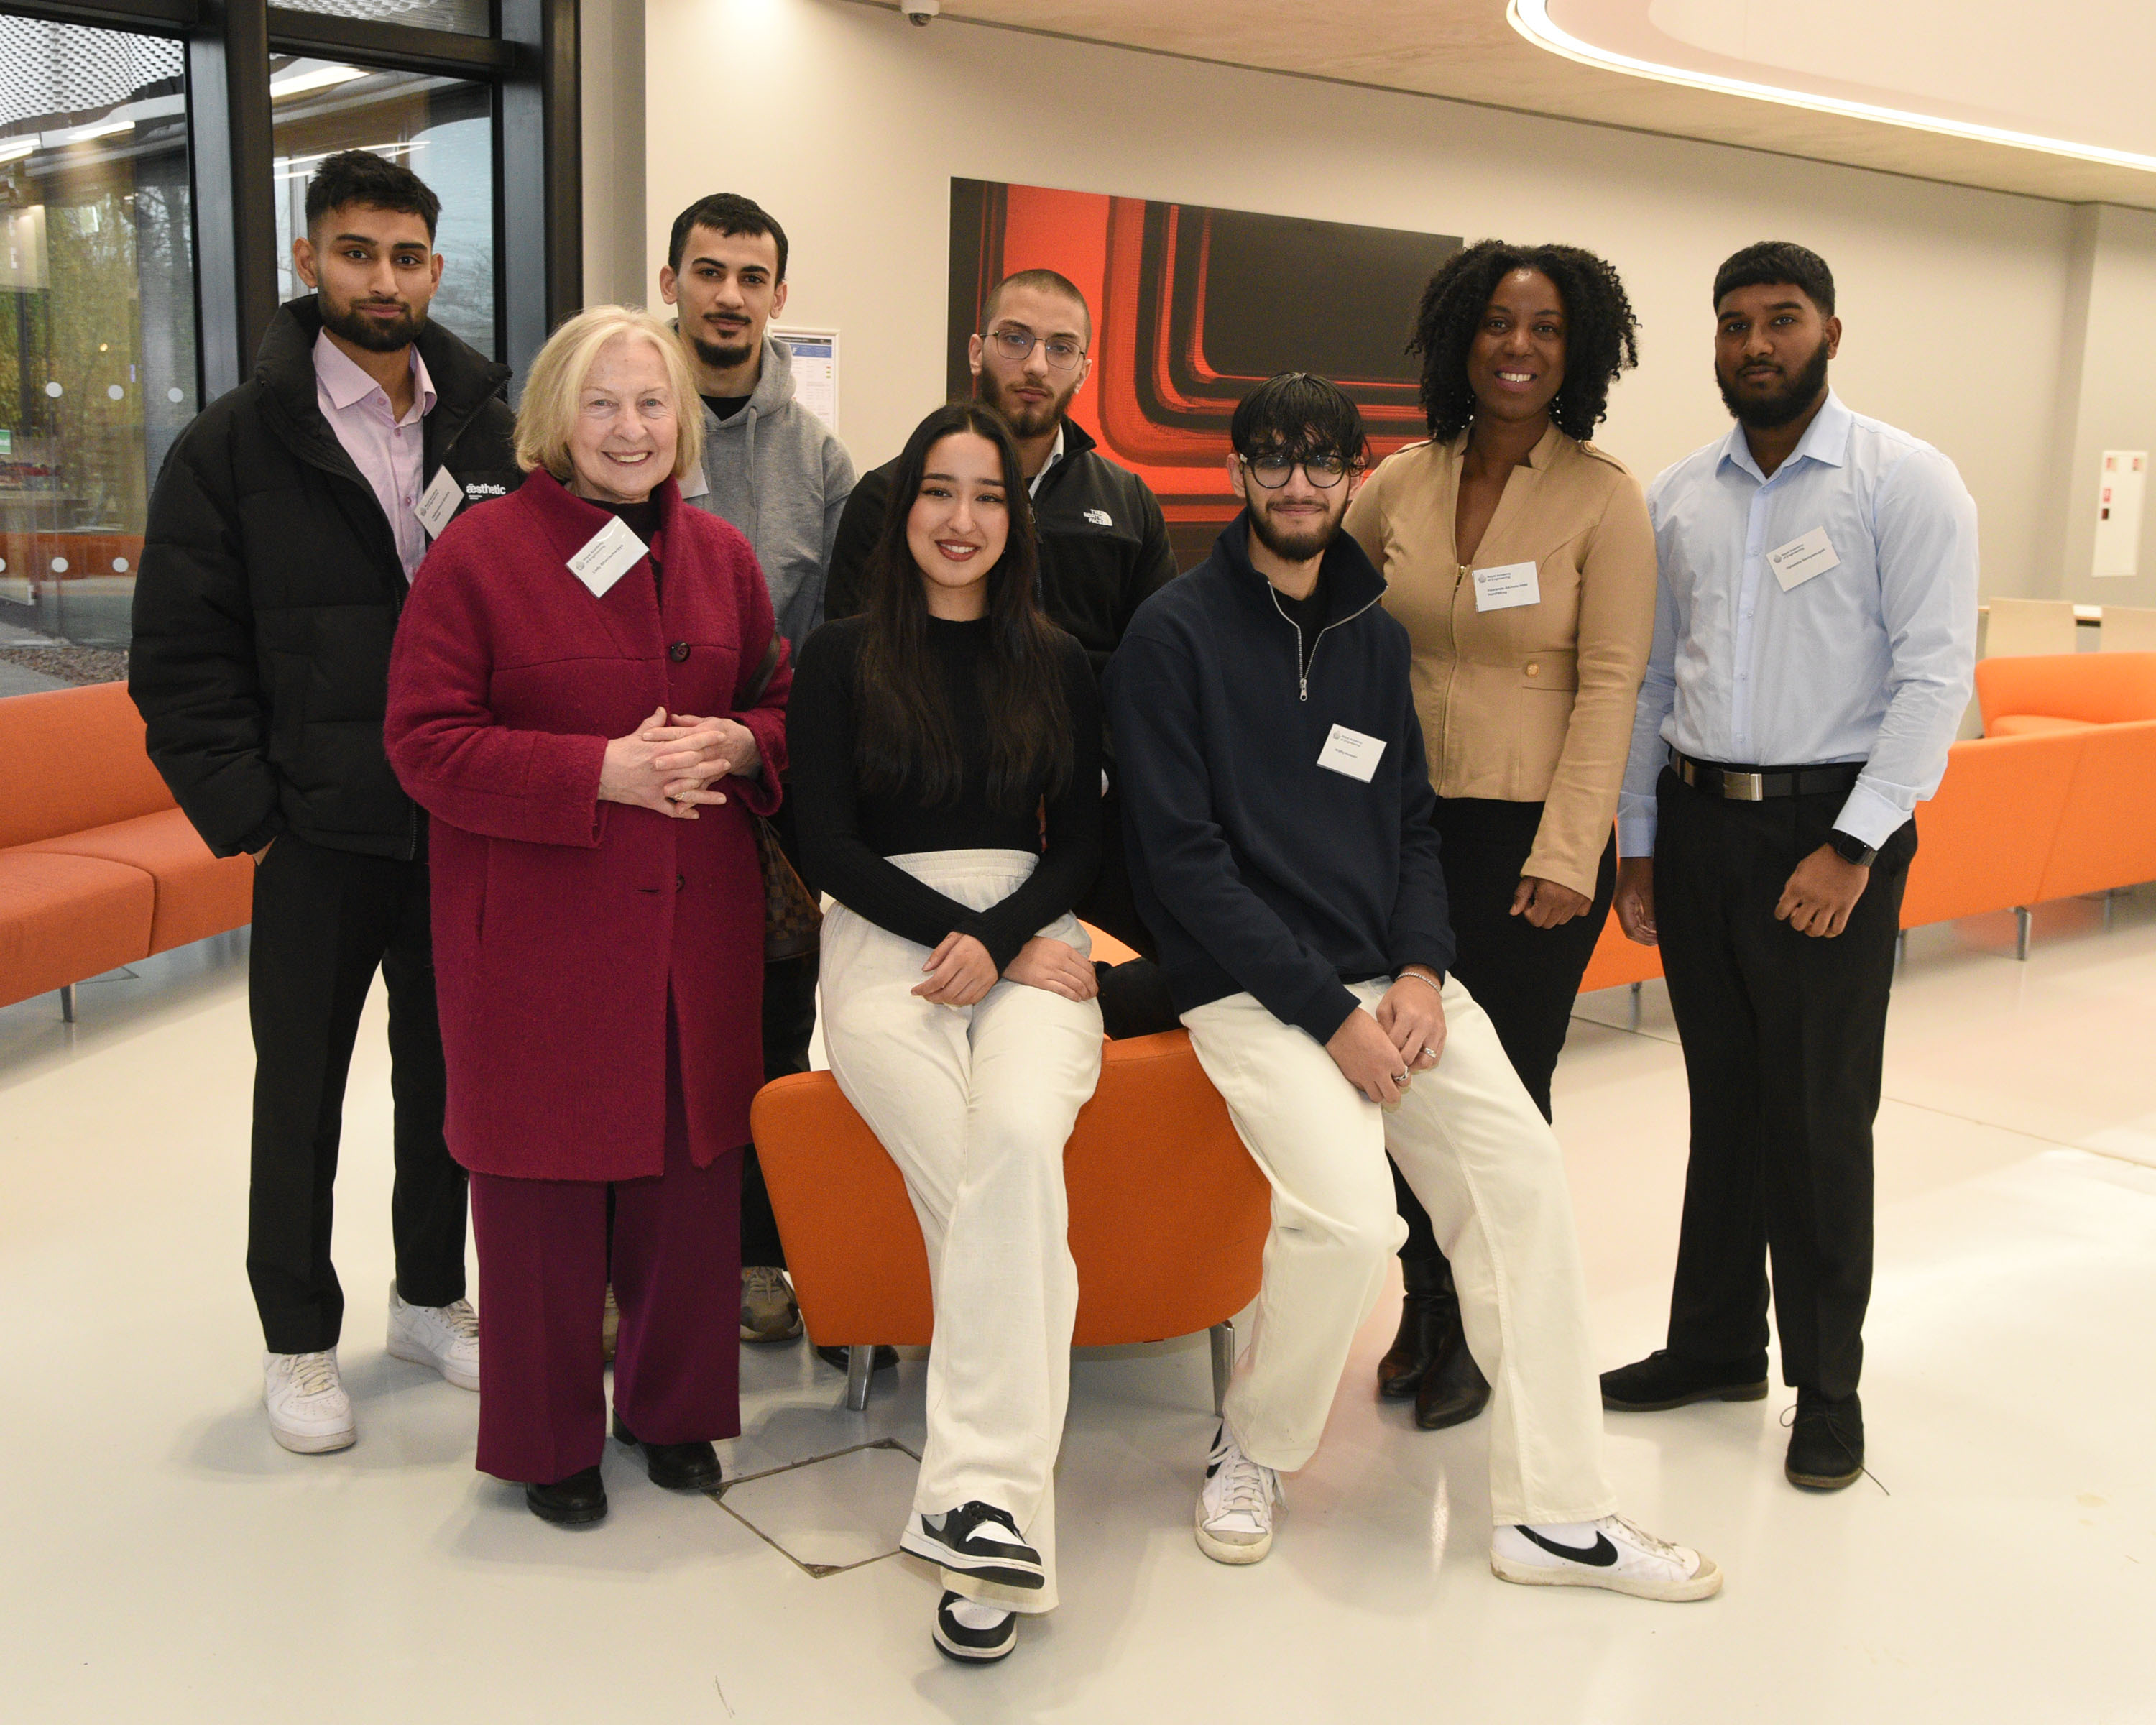 Two of the latest recipients of Lord Bhattacharyya HE bursaries, Saara Hussain and Wafiq Hussain (seated front row), at the celebration in Coventry with Lady Bhattacharyya (second left), keynote speaker Yewande Akinola MBE HonFREng (second right), and past recipients of HE bursaries, Mohammed Akther; Saman Salih; Dawud Ahmed and Dylenda Sooryamuyah (back row).